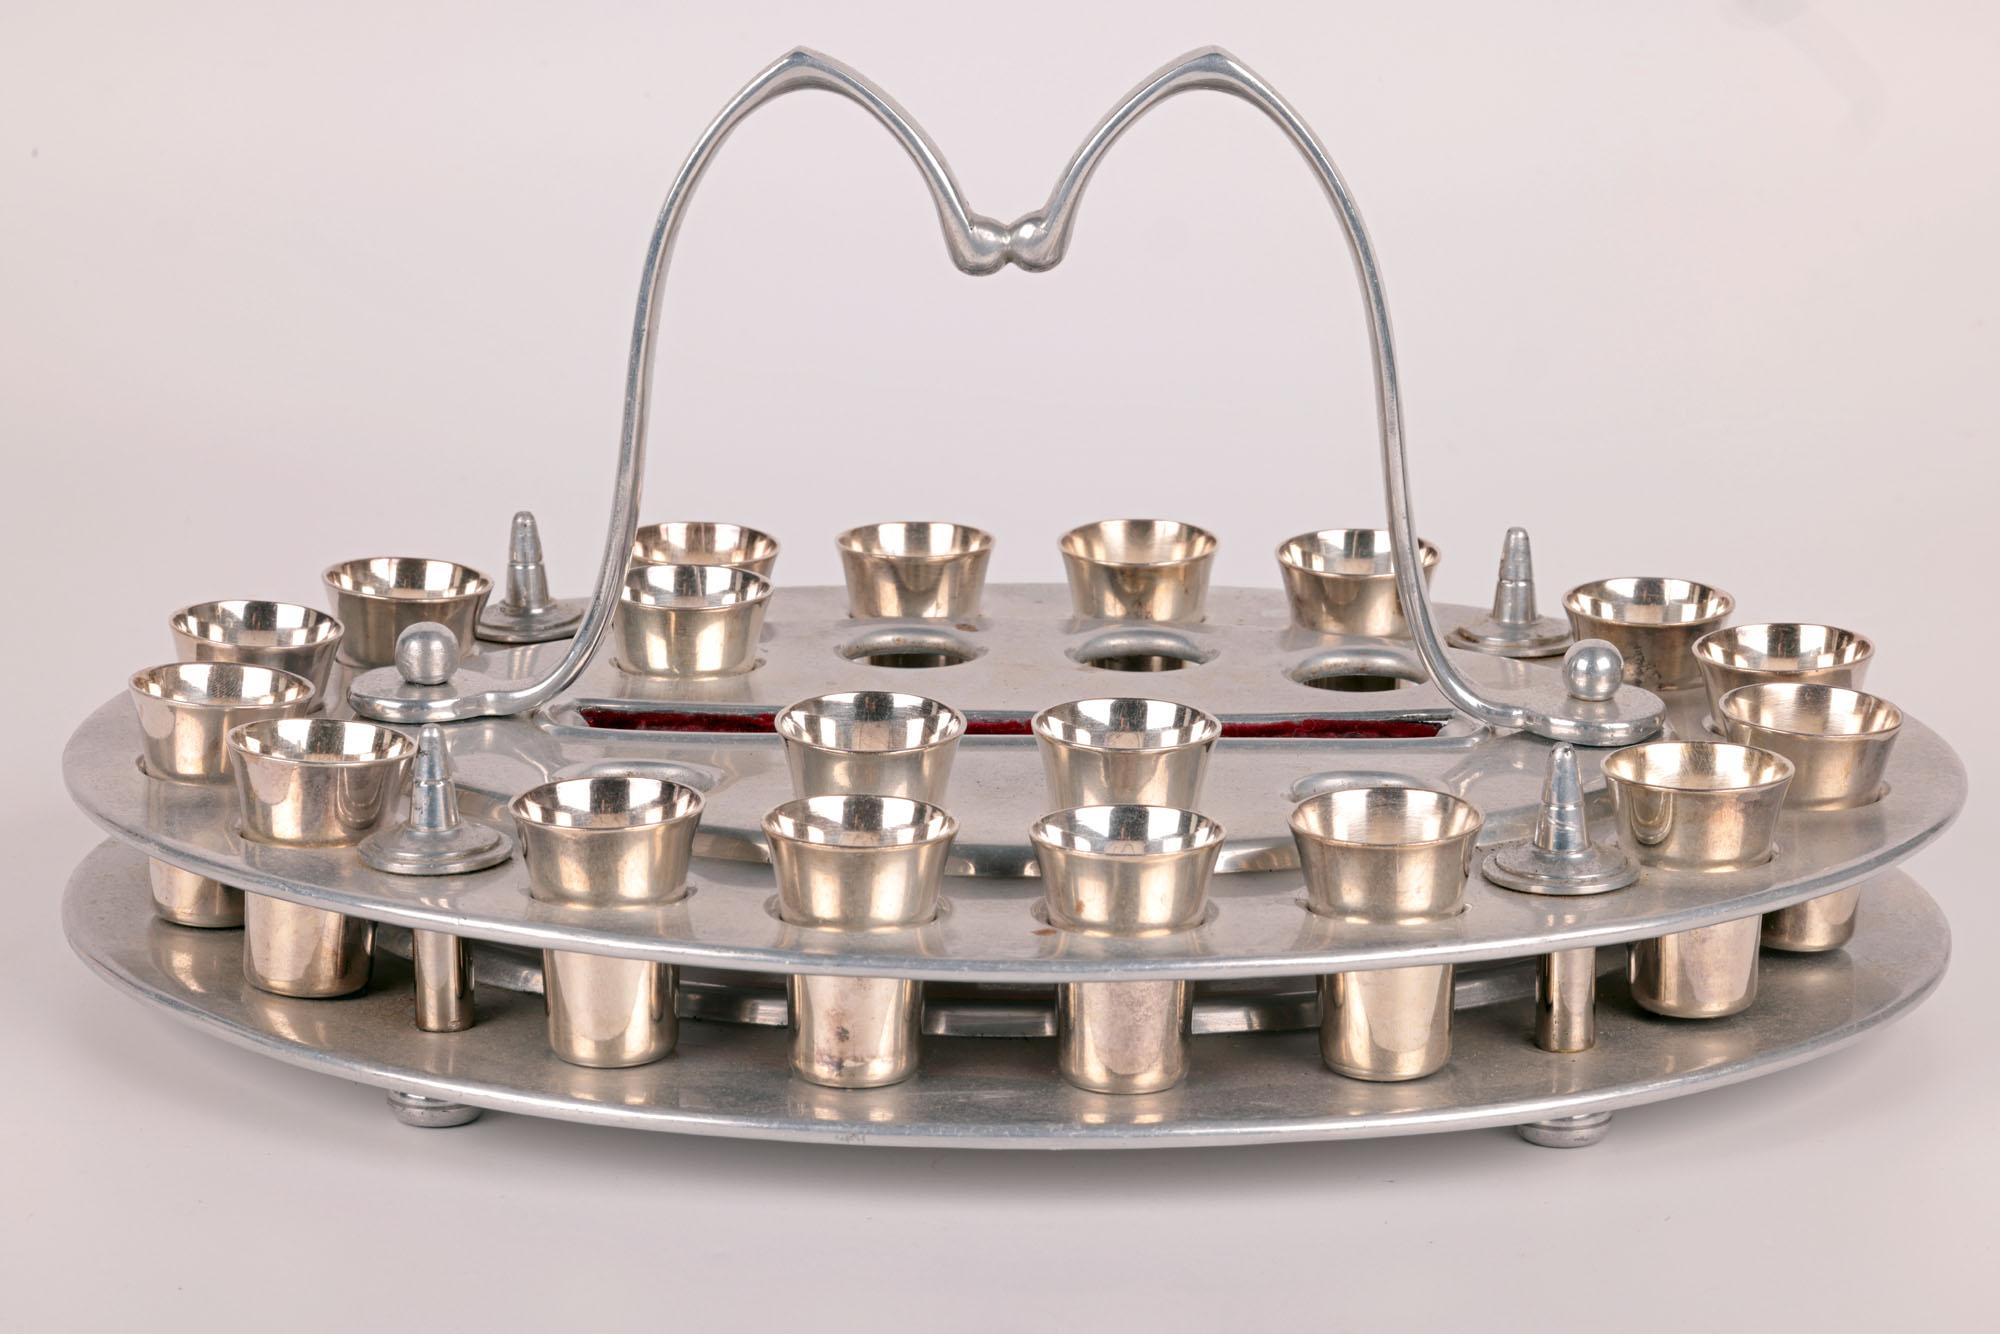 Townshends Birmingham Aluminium and Electroplated Patent Communion Set For Sale 5